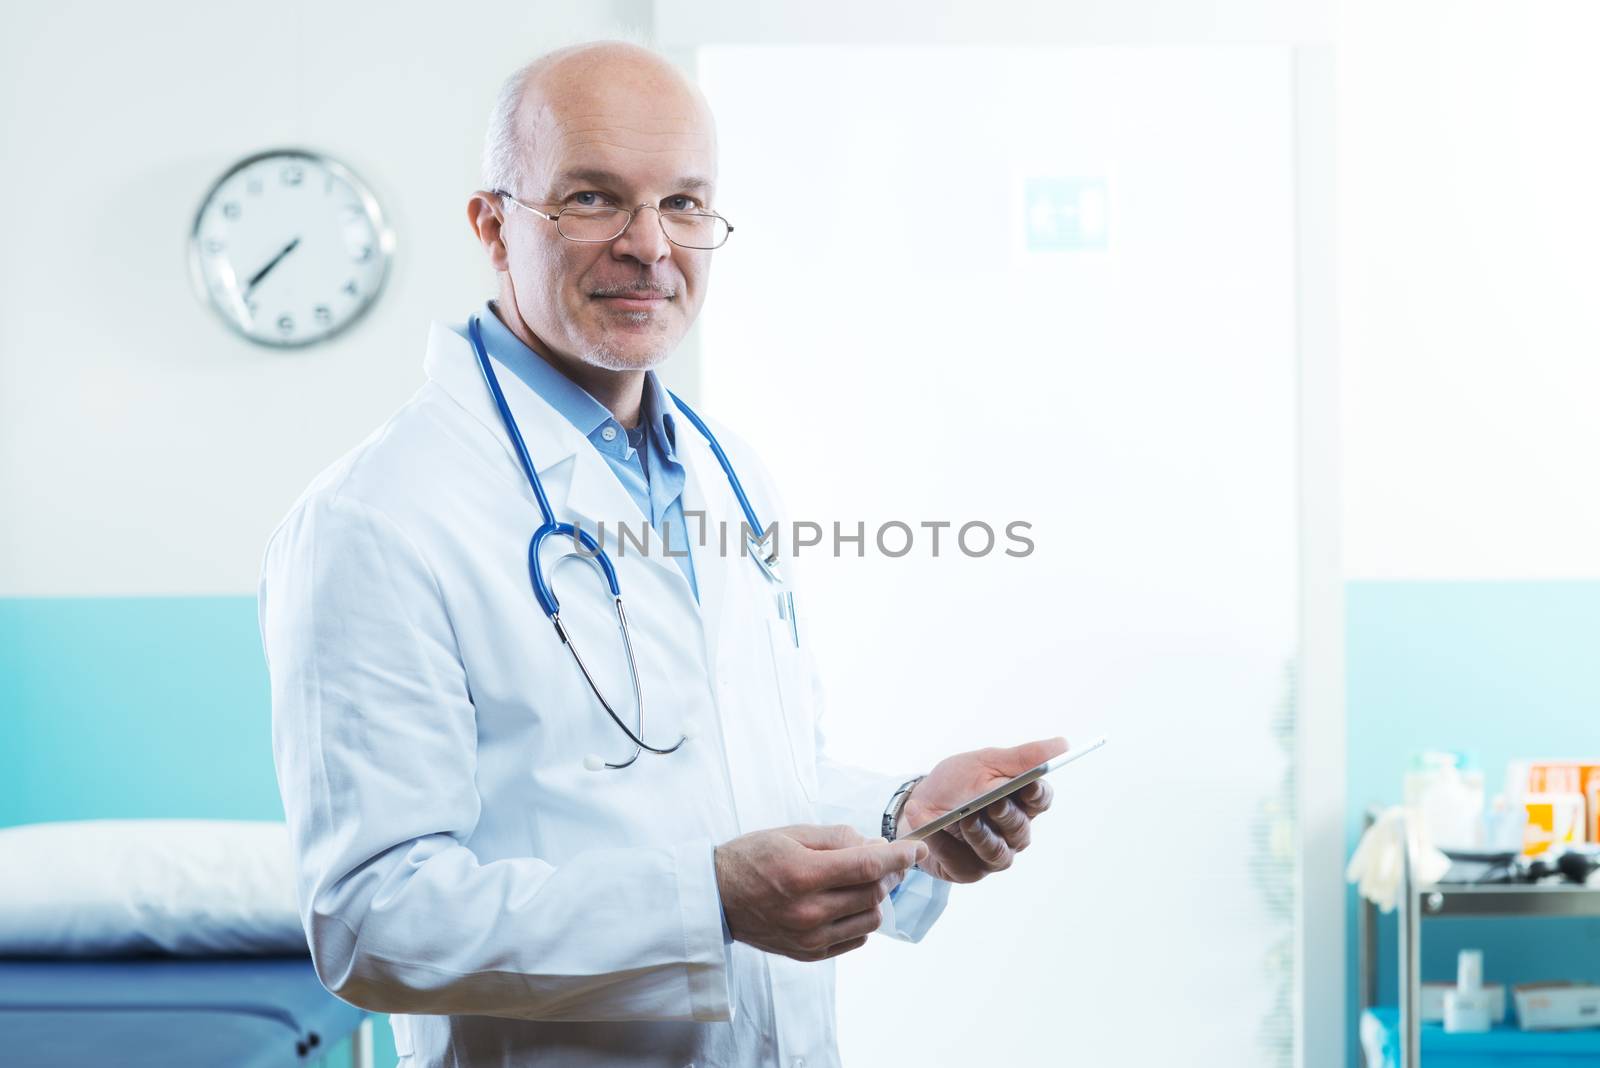 Senior doctor with tablet and medical equipment in the background.